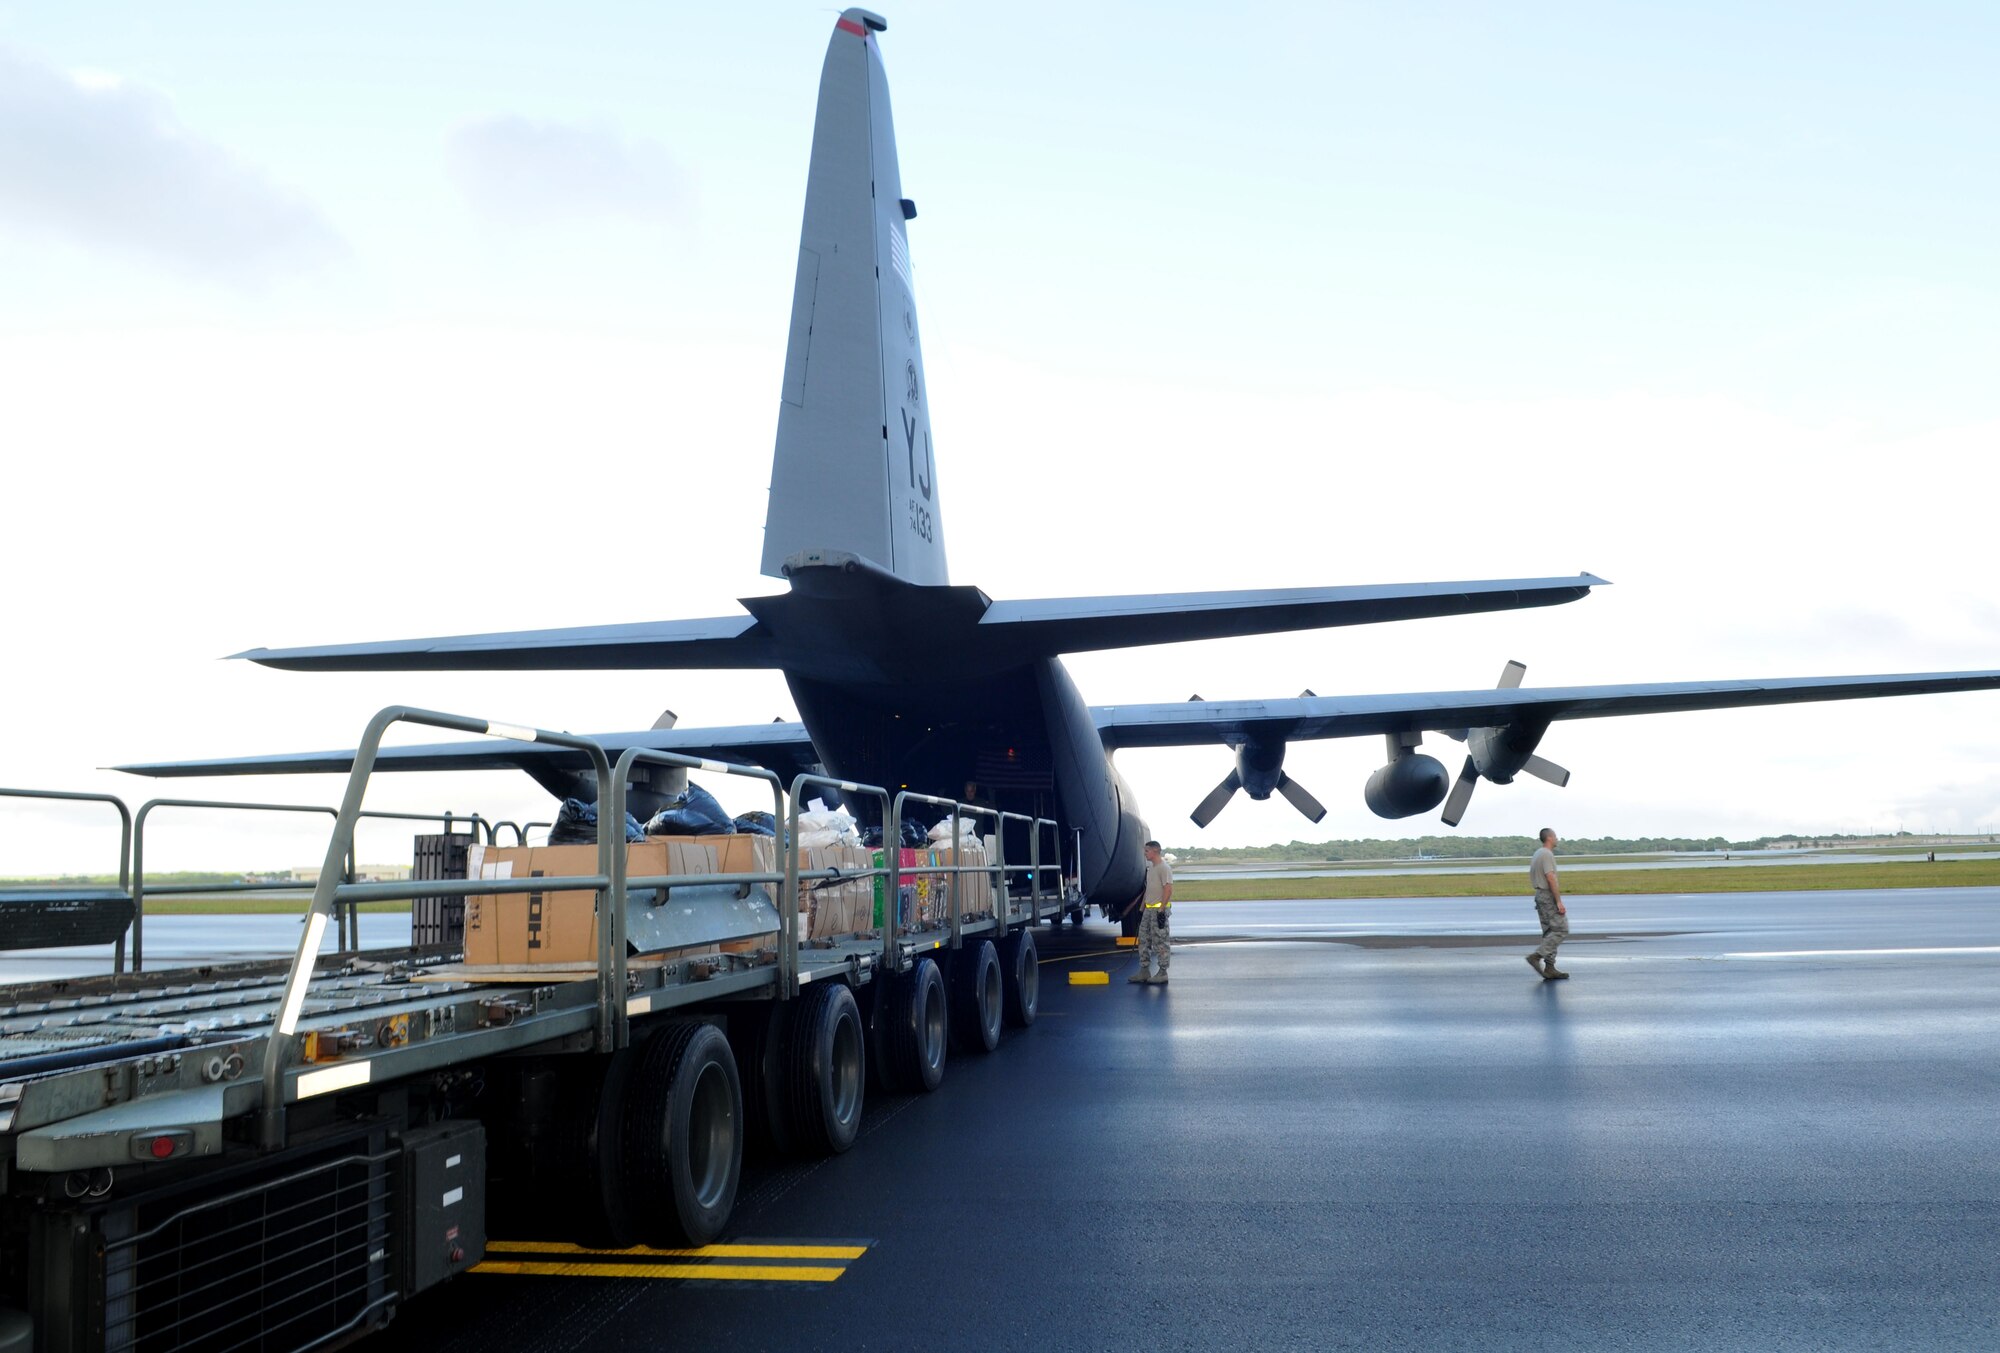 Airmen from the 36th Airlift Squadron, Yokota Air Base, Japan, load boxes of donated goods worth more than $93,000 onto a C-130 Hercules prior to take-off from Andersen Air Force Base, Guam, during Operation Christmas Drop Dec. 14. This year more than 60 boxes will be dropped to 55 Island weighing in at more than 20,000 pounds. Operation Christmas Drop is the Air Force?s longest-running humanitarian which began in 1952. Airmen today continue the tradition delivering supplies to remote islands of the Commonwealth of the Northern Marianas Islands, Yap, Palau, Chuuk and Pohnpei. (U.S. Air Force photo/ Senior Airman Nichelle Anderson)  